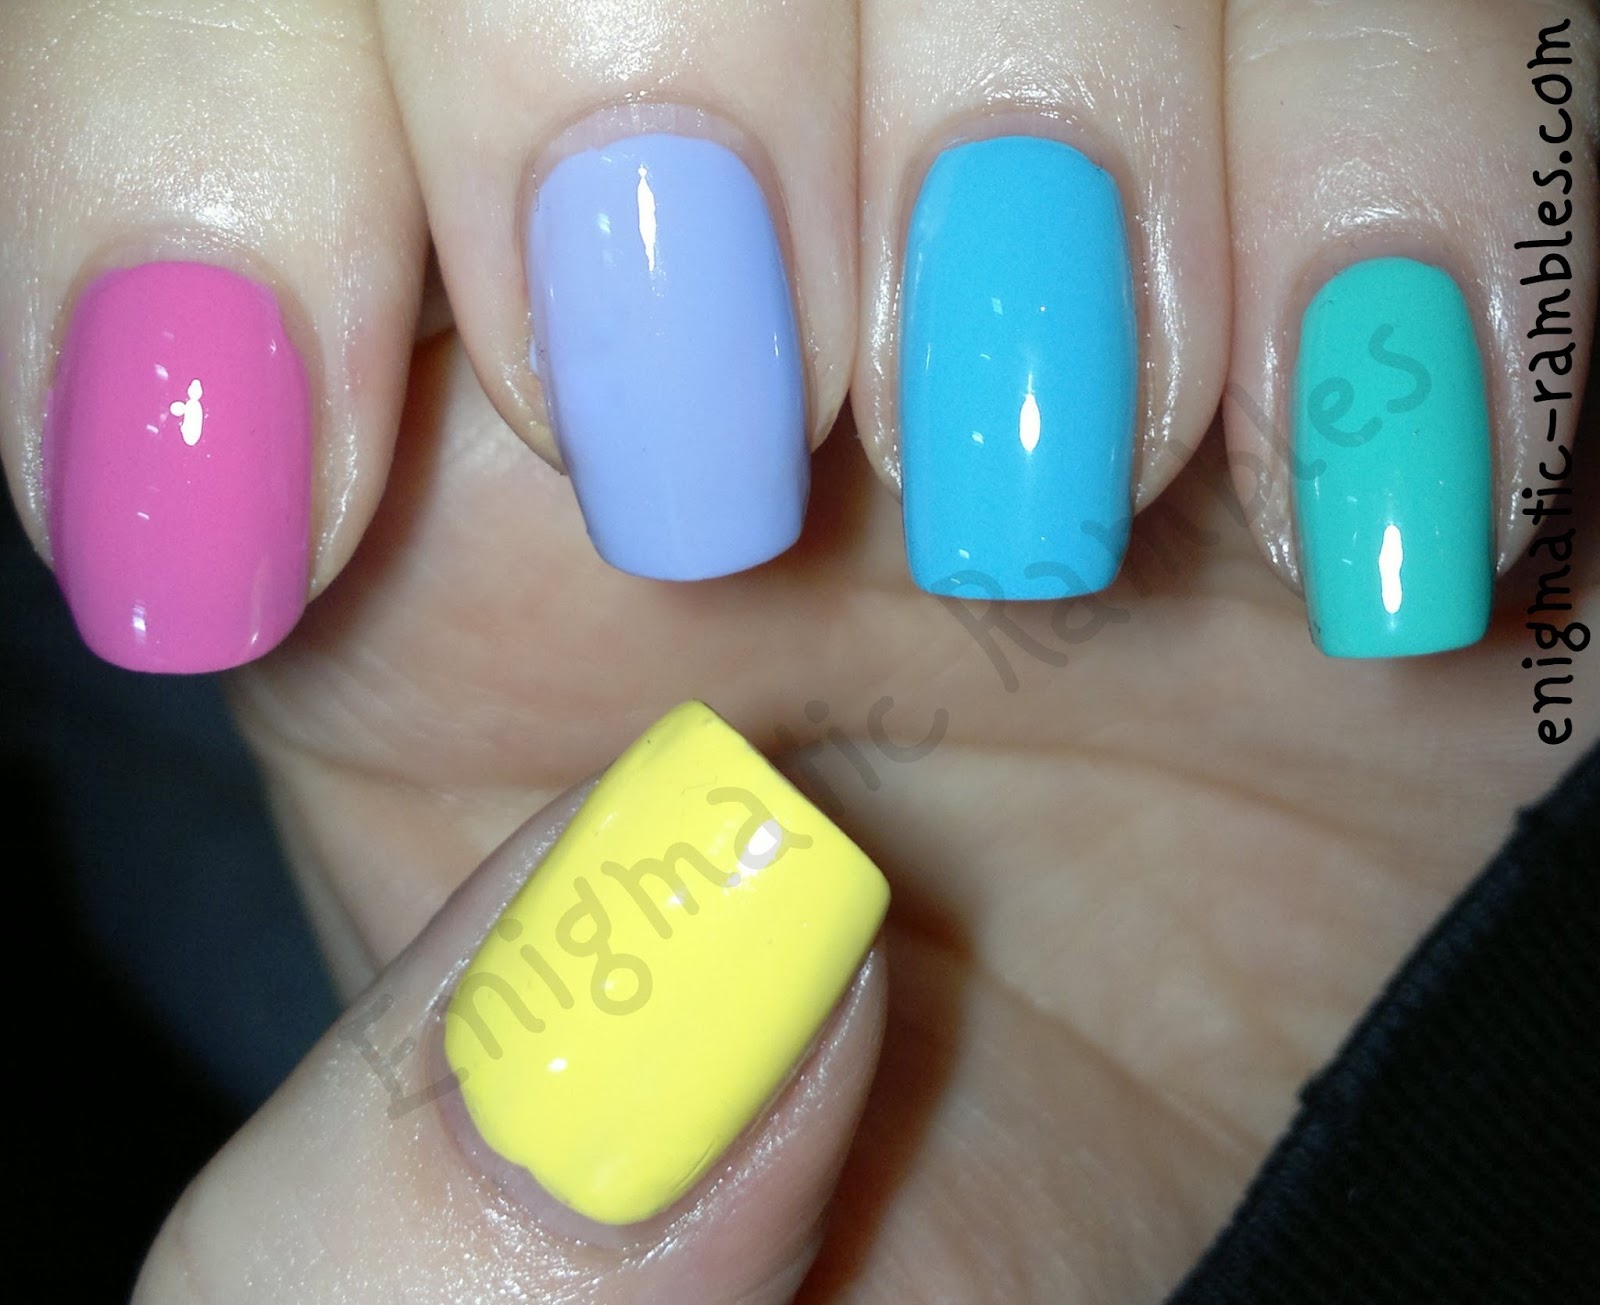 spring-2014-nail-polish-varnish-elf-eye-lips-face-yellow-models-own-pink-blush-barry-m-prickly-pear-greenberry-maybelline-cool-blue-skittle